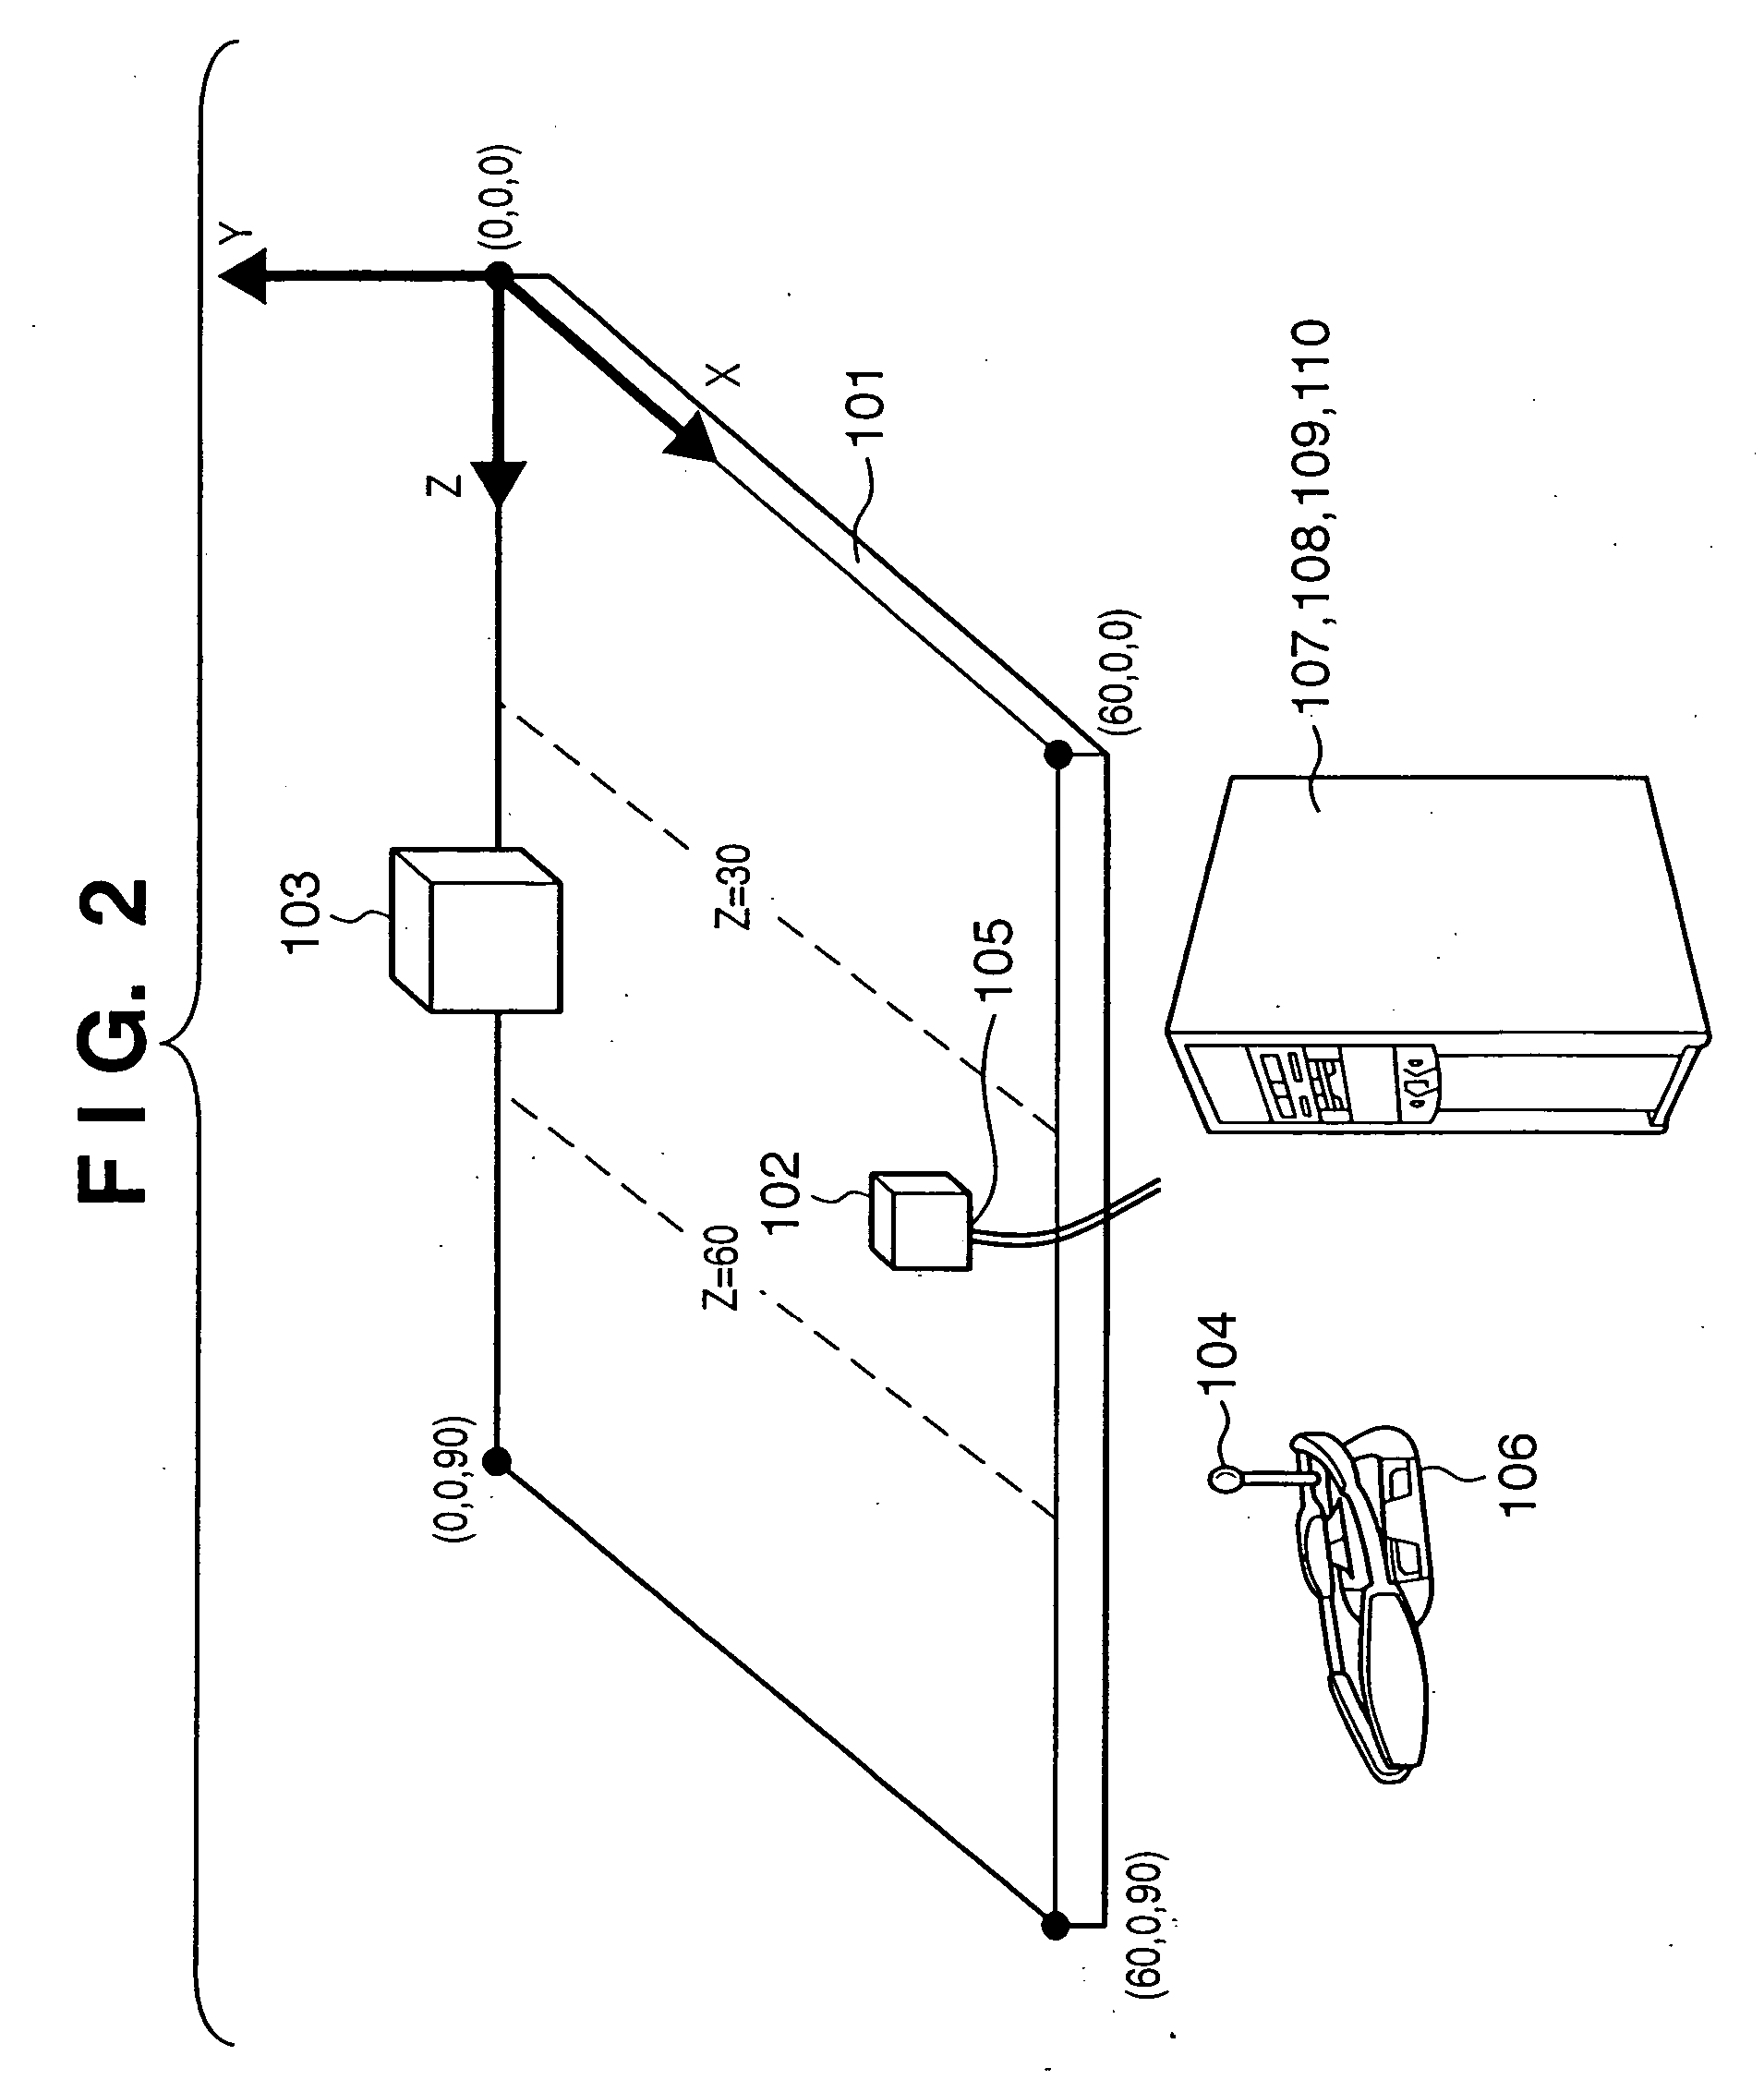 Image processing apparatus and method, and calibration device for position and orientation sensor